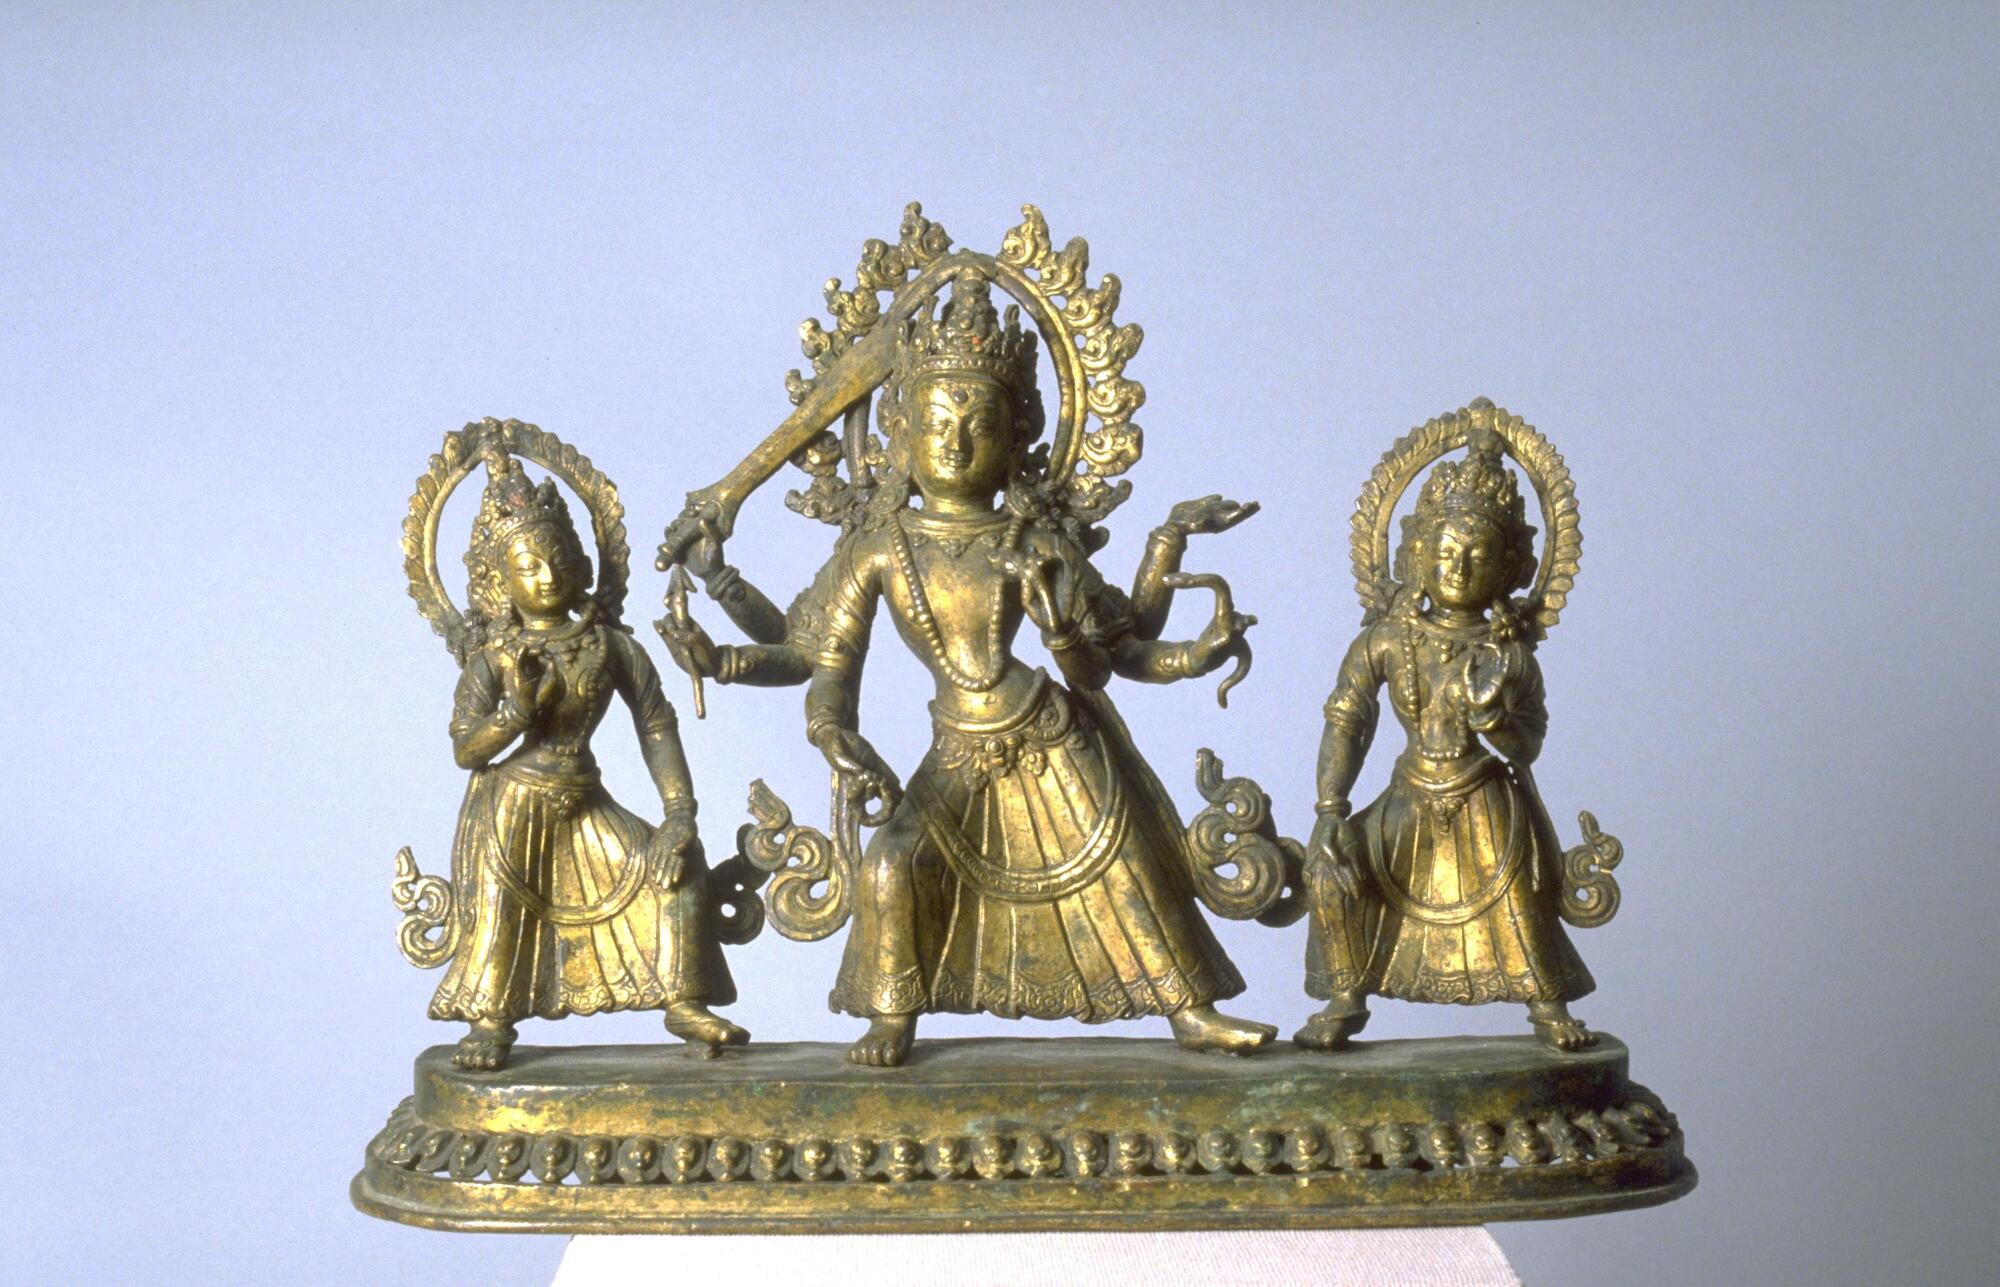 Mañjusri, the Bodhisattva of Wisdom, standing with two celestial attendants.  This representation of Manjushri includes six arms, one of which holds a sword, while a narrow book (modeled after books made from palm leaves) lays across his upper hand.  Manjushri is wearing an ornamented crown and necklace, and is encircled by a halo of flames.